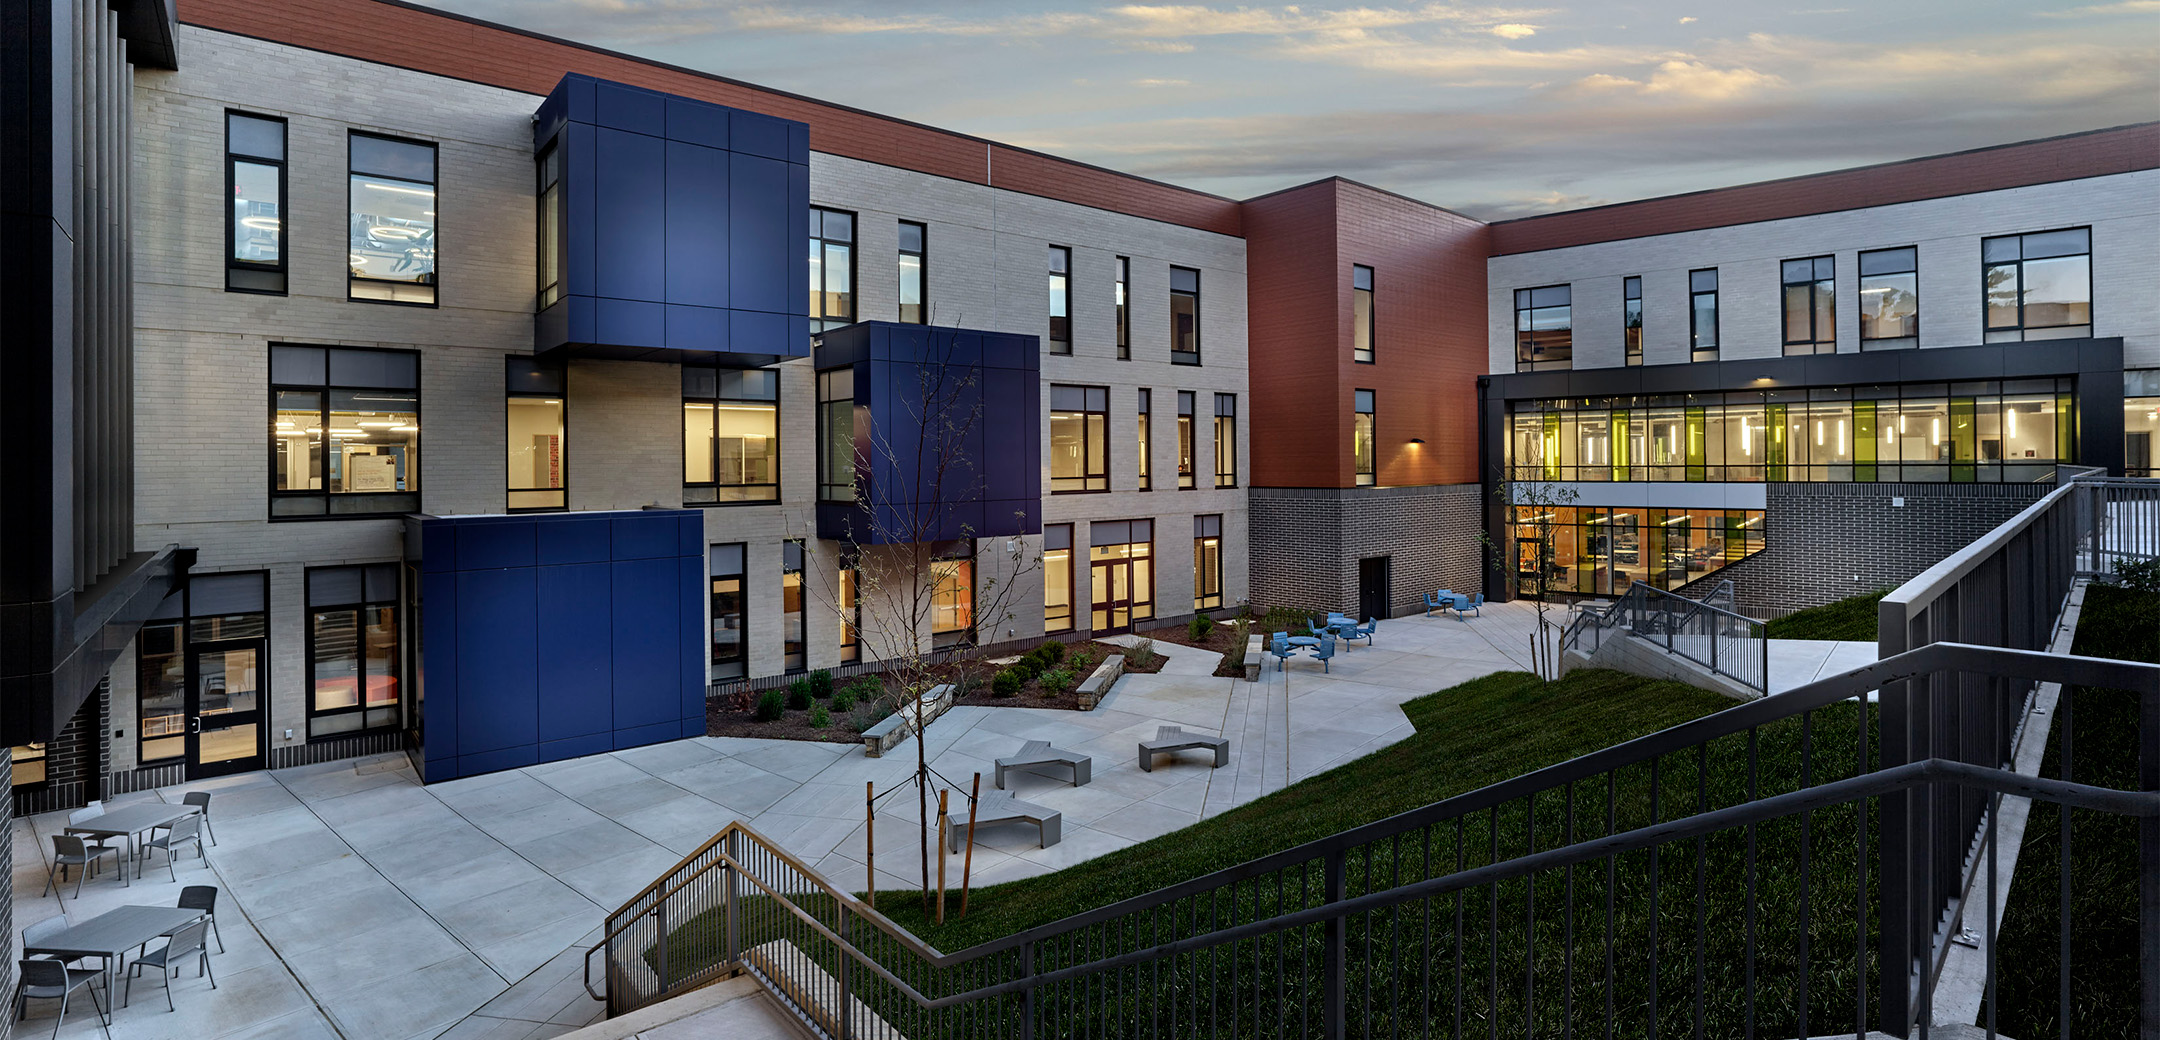 The exterior backside of Black Rock Middle School featuring a terrace enclosed within the building walls.